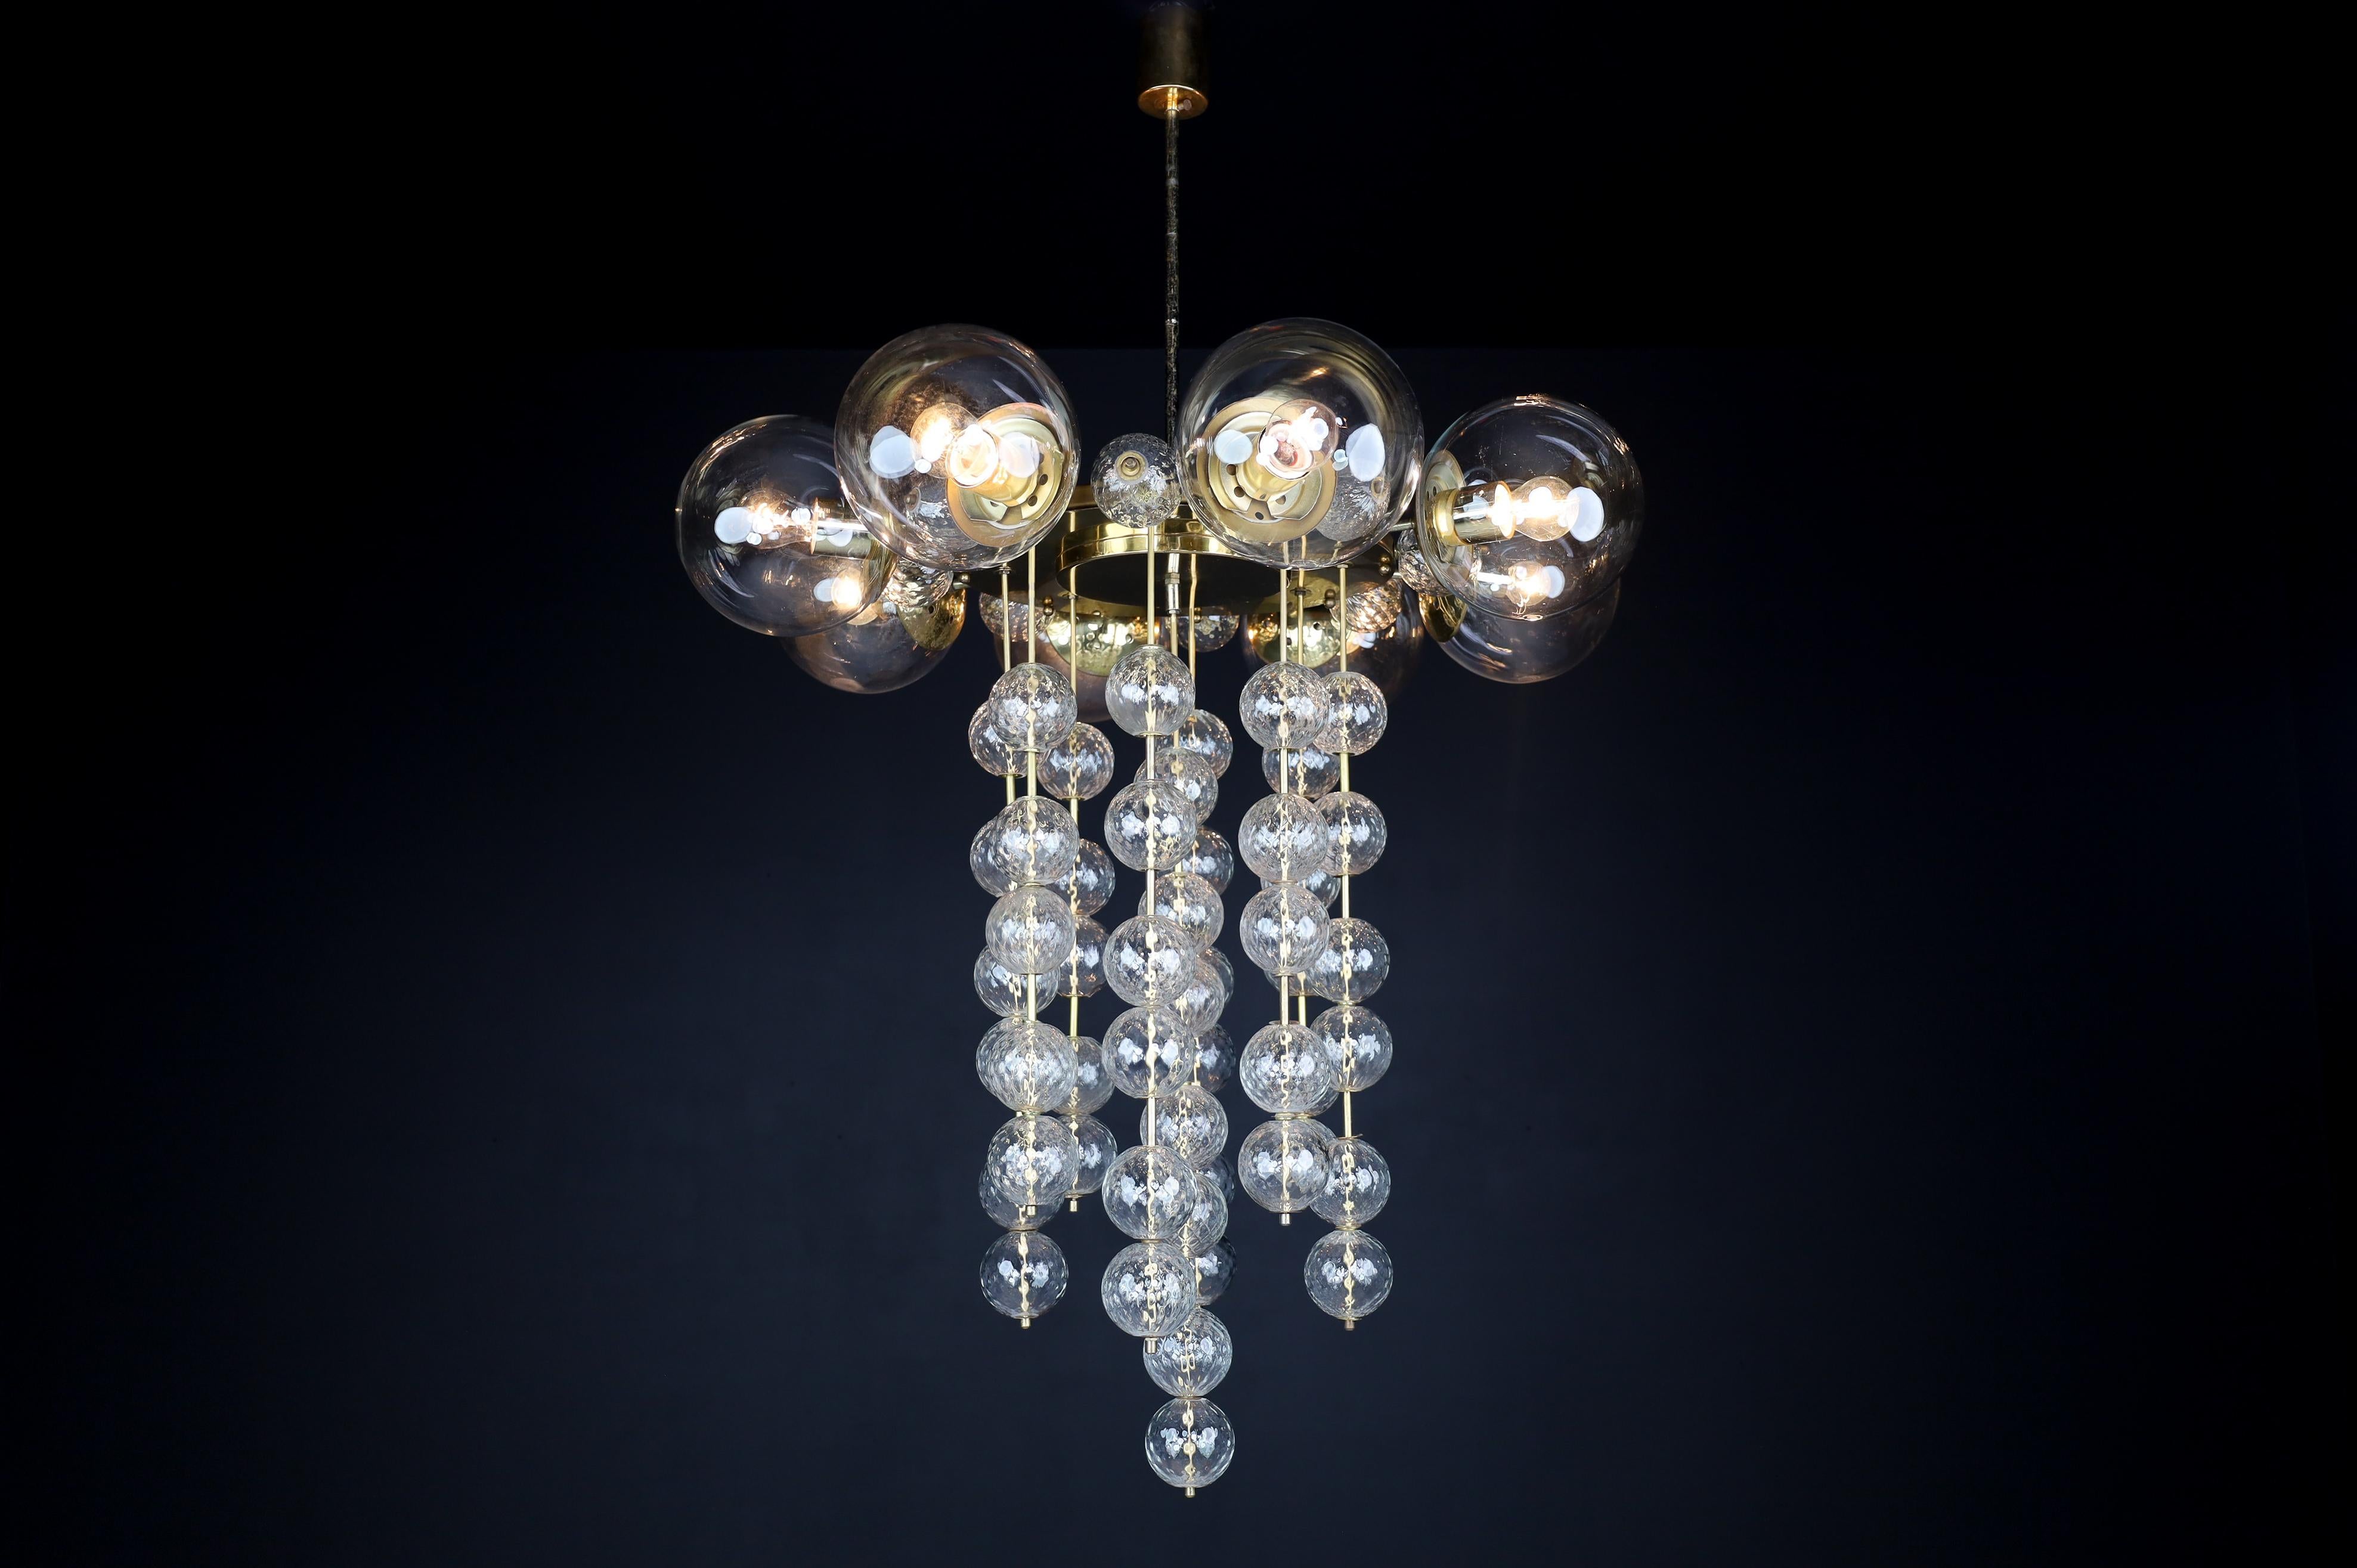 Grand Chandelier with Brass Fixture and Hand-blowed Glass Globes, 1960s For Sale 12